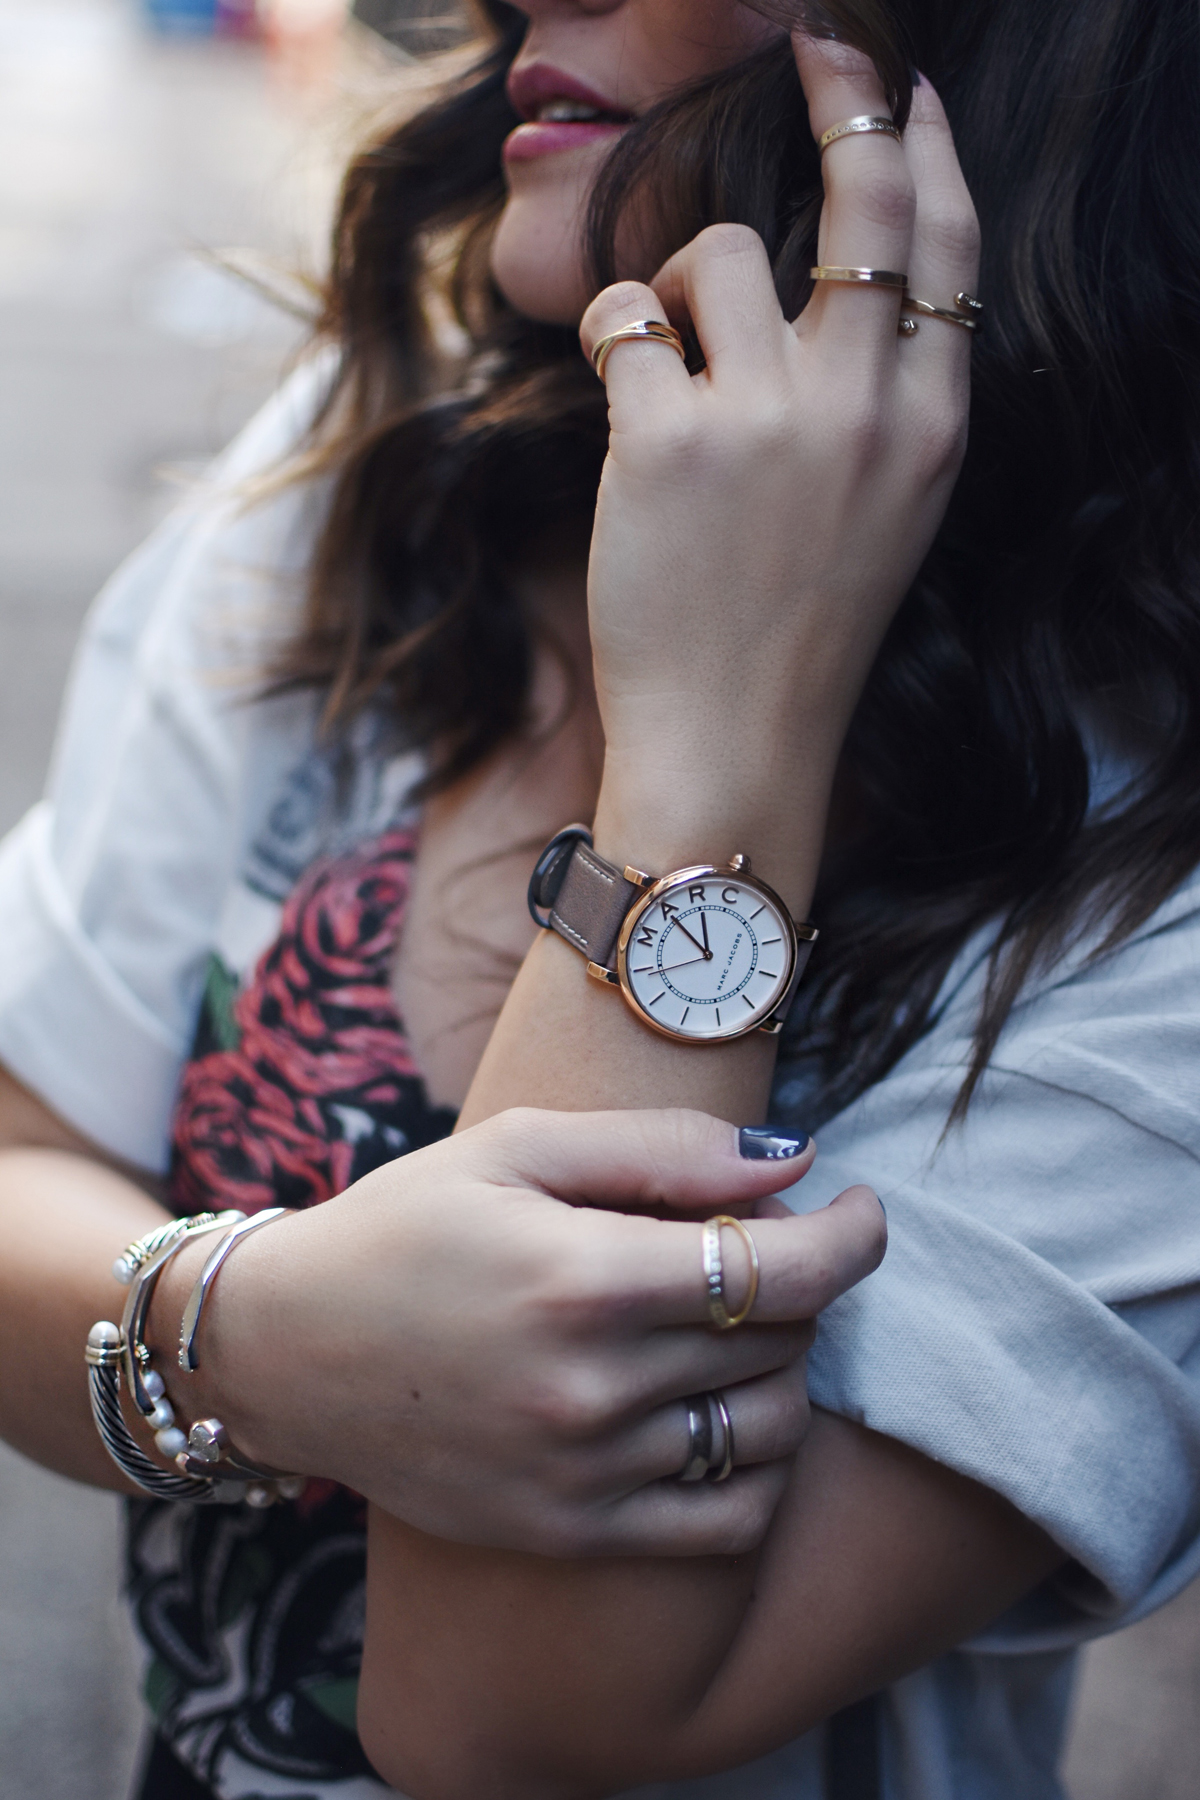 Marc by Marc Jacobs watch and Kendra Scott gold earrings